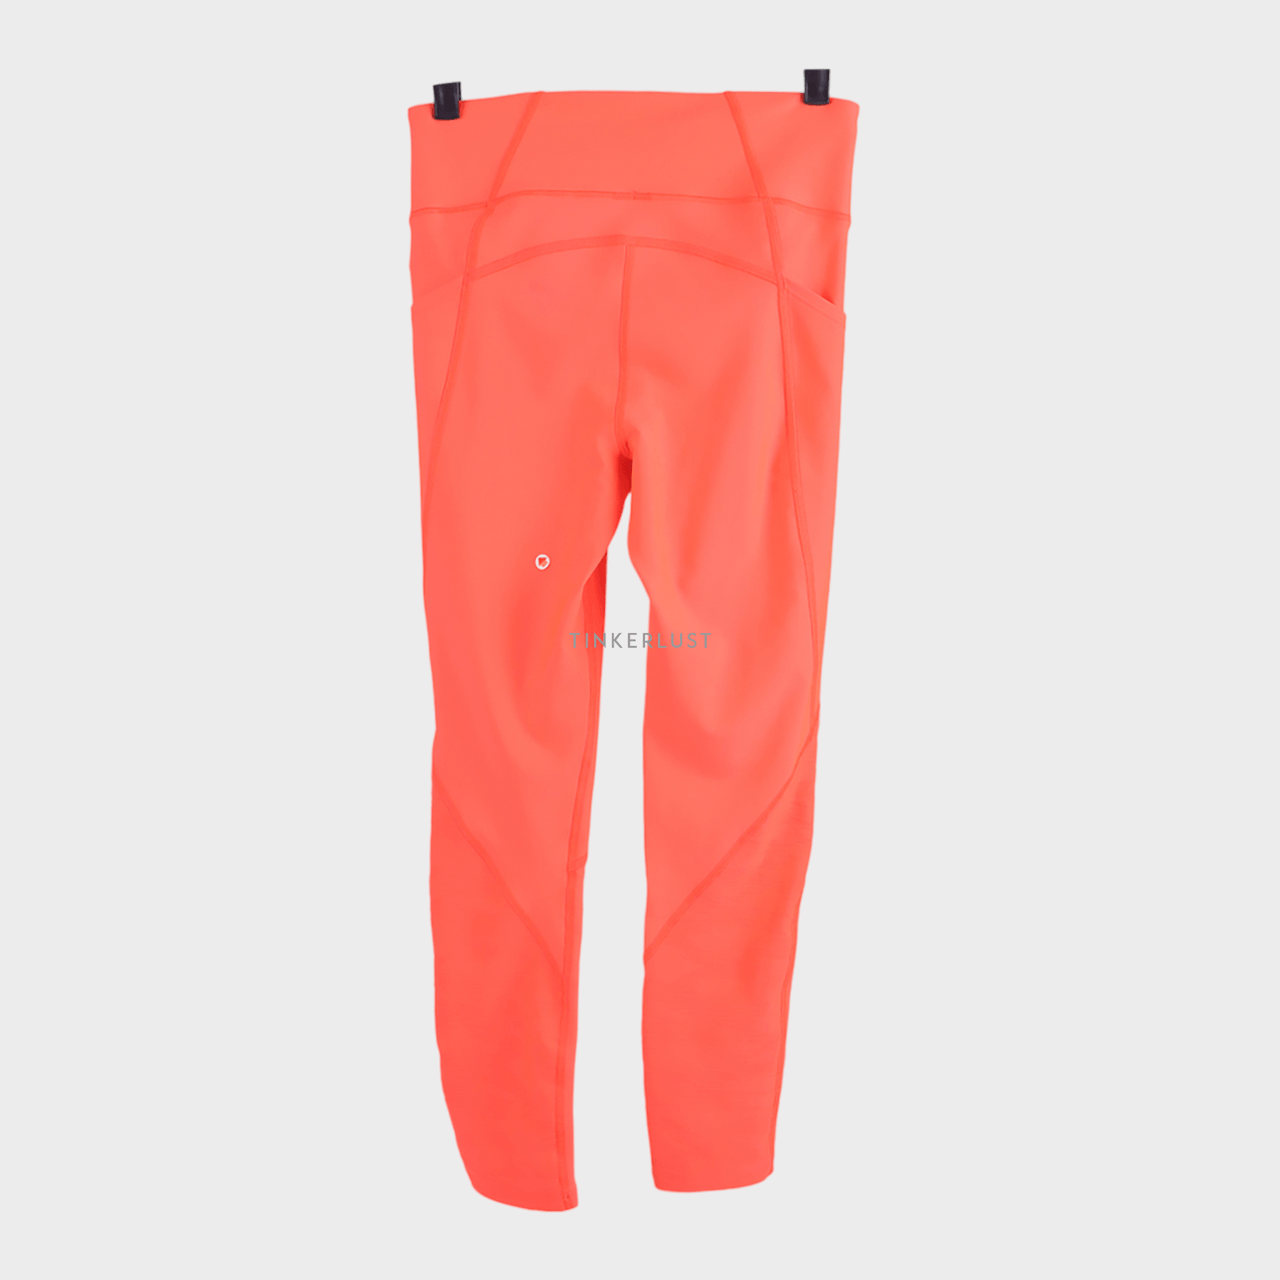 Under Armour Coral Neon Pants